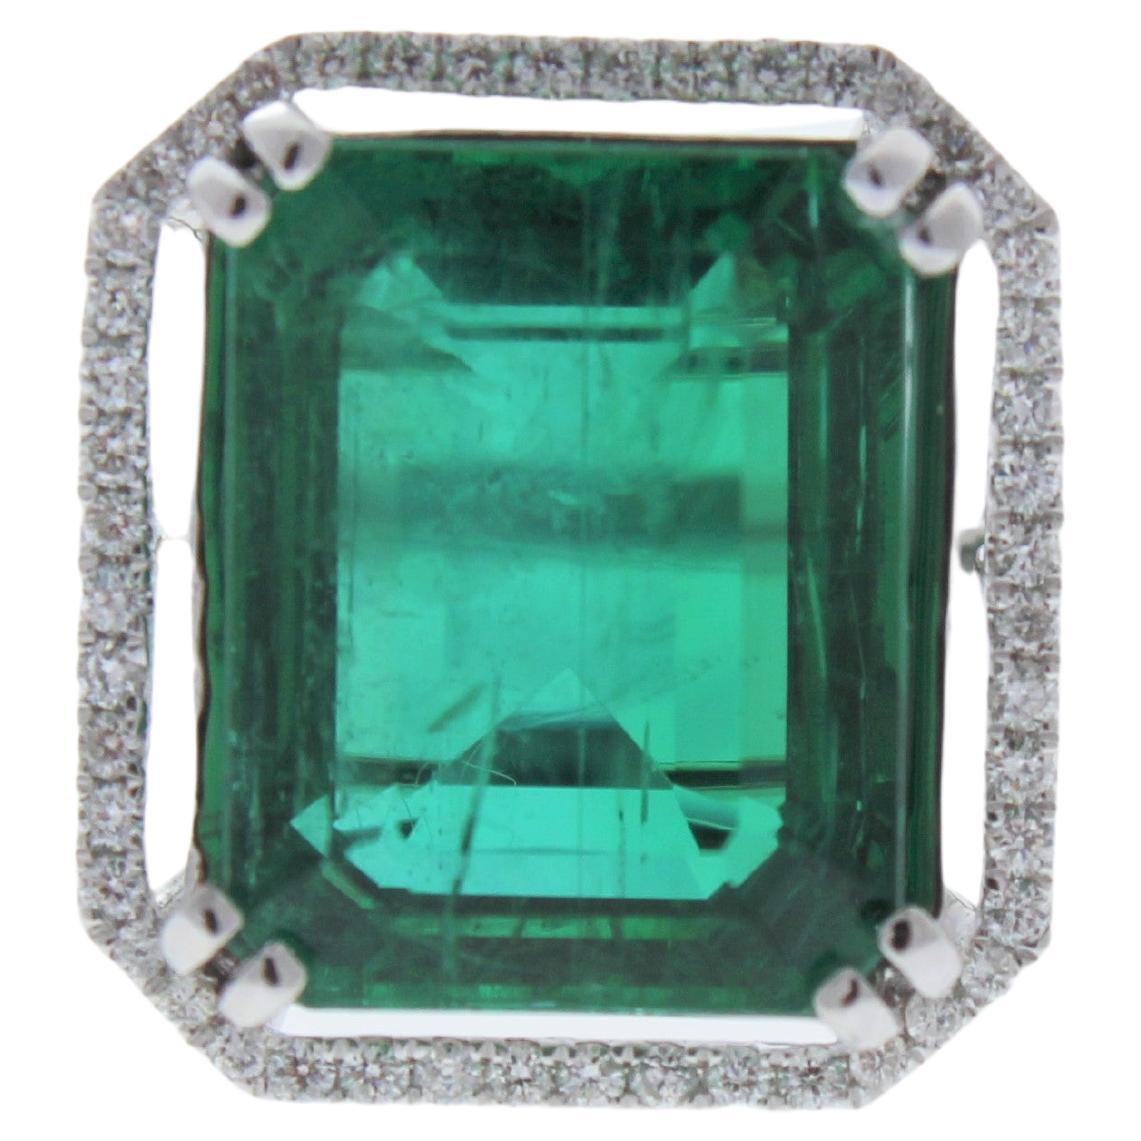 8.24 Carat Emerald and Diamond Ring in 14k White Gold